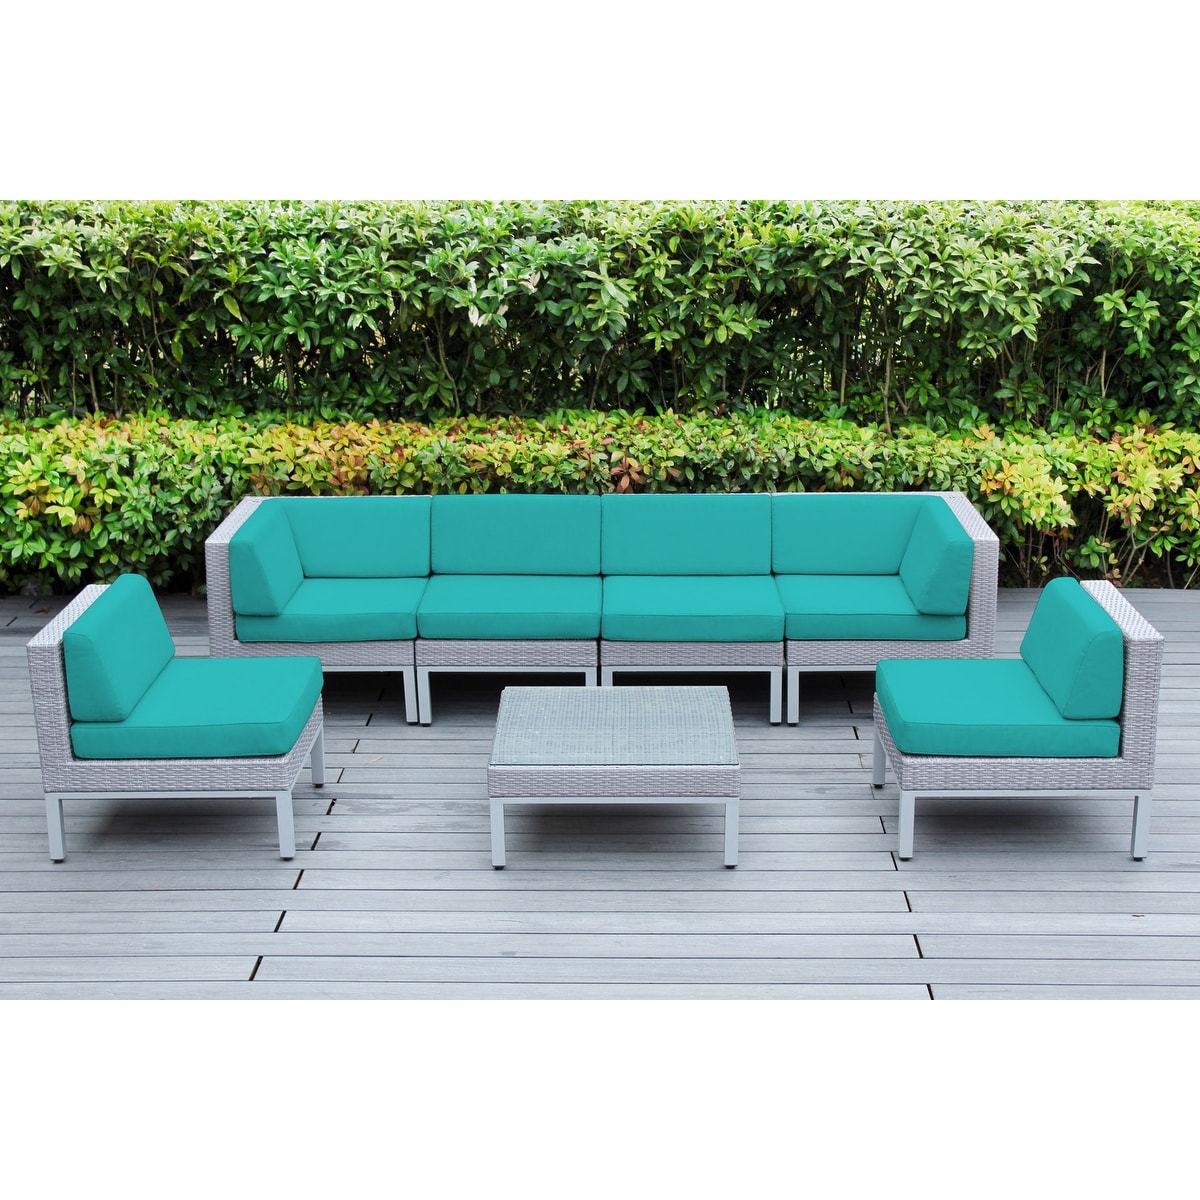 Contemporary 7-piece Gray Wicker Outdoor Patio Seating Group With Cushions